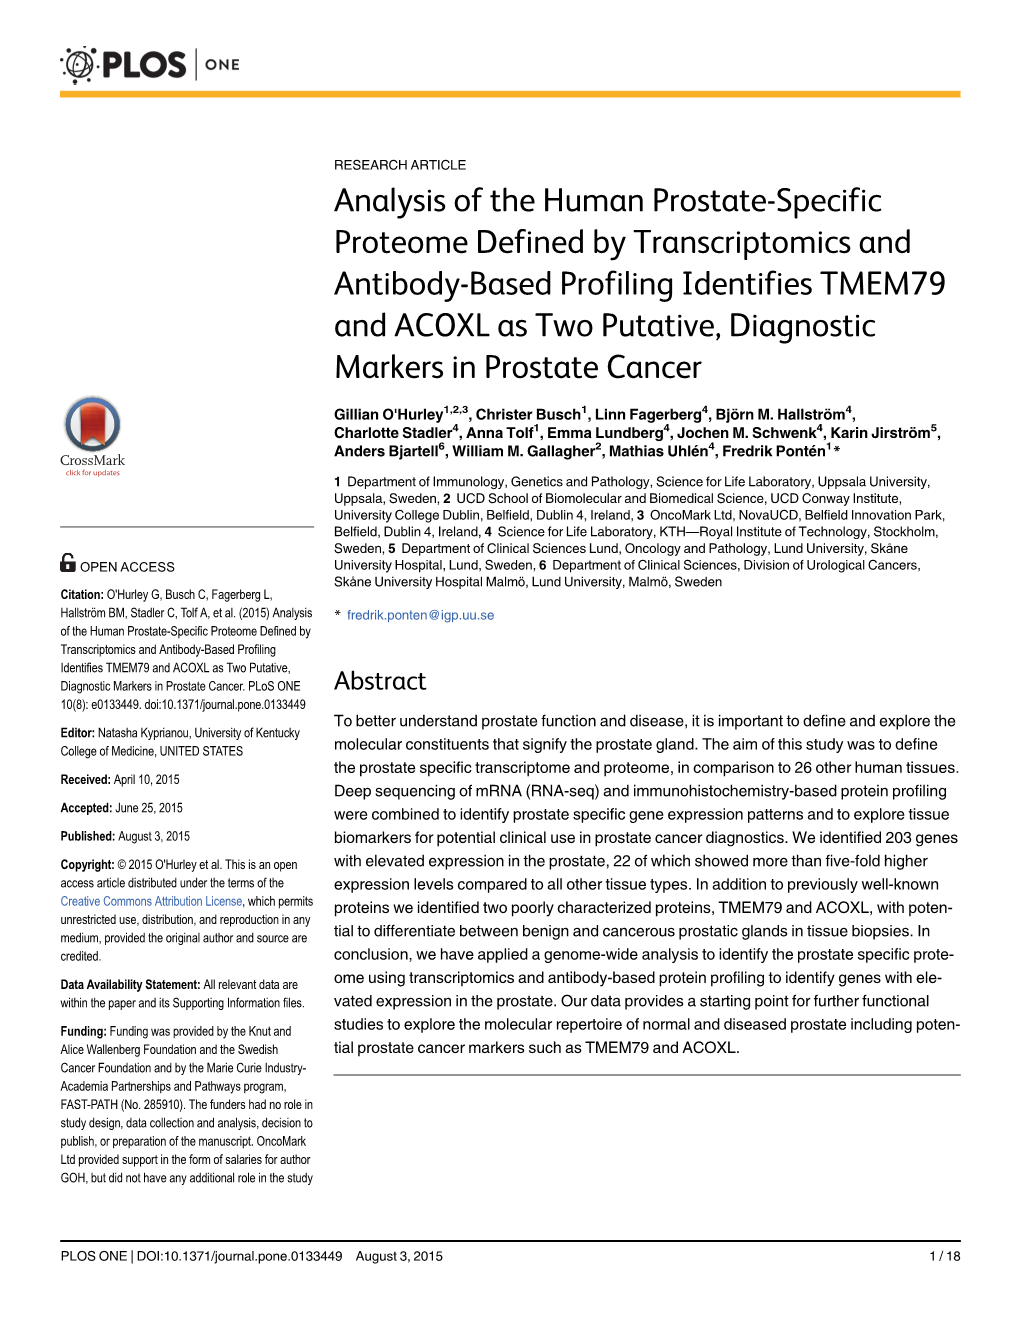 Analysis of the Human Prostate-Specific Proteome Defined